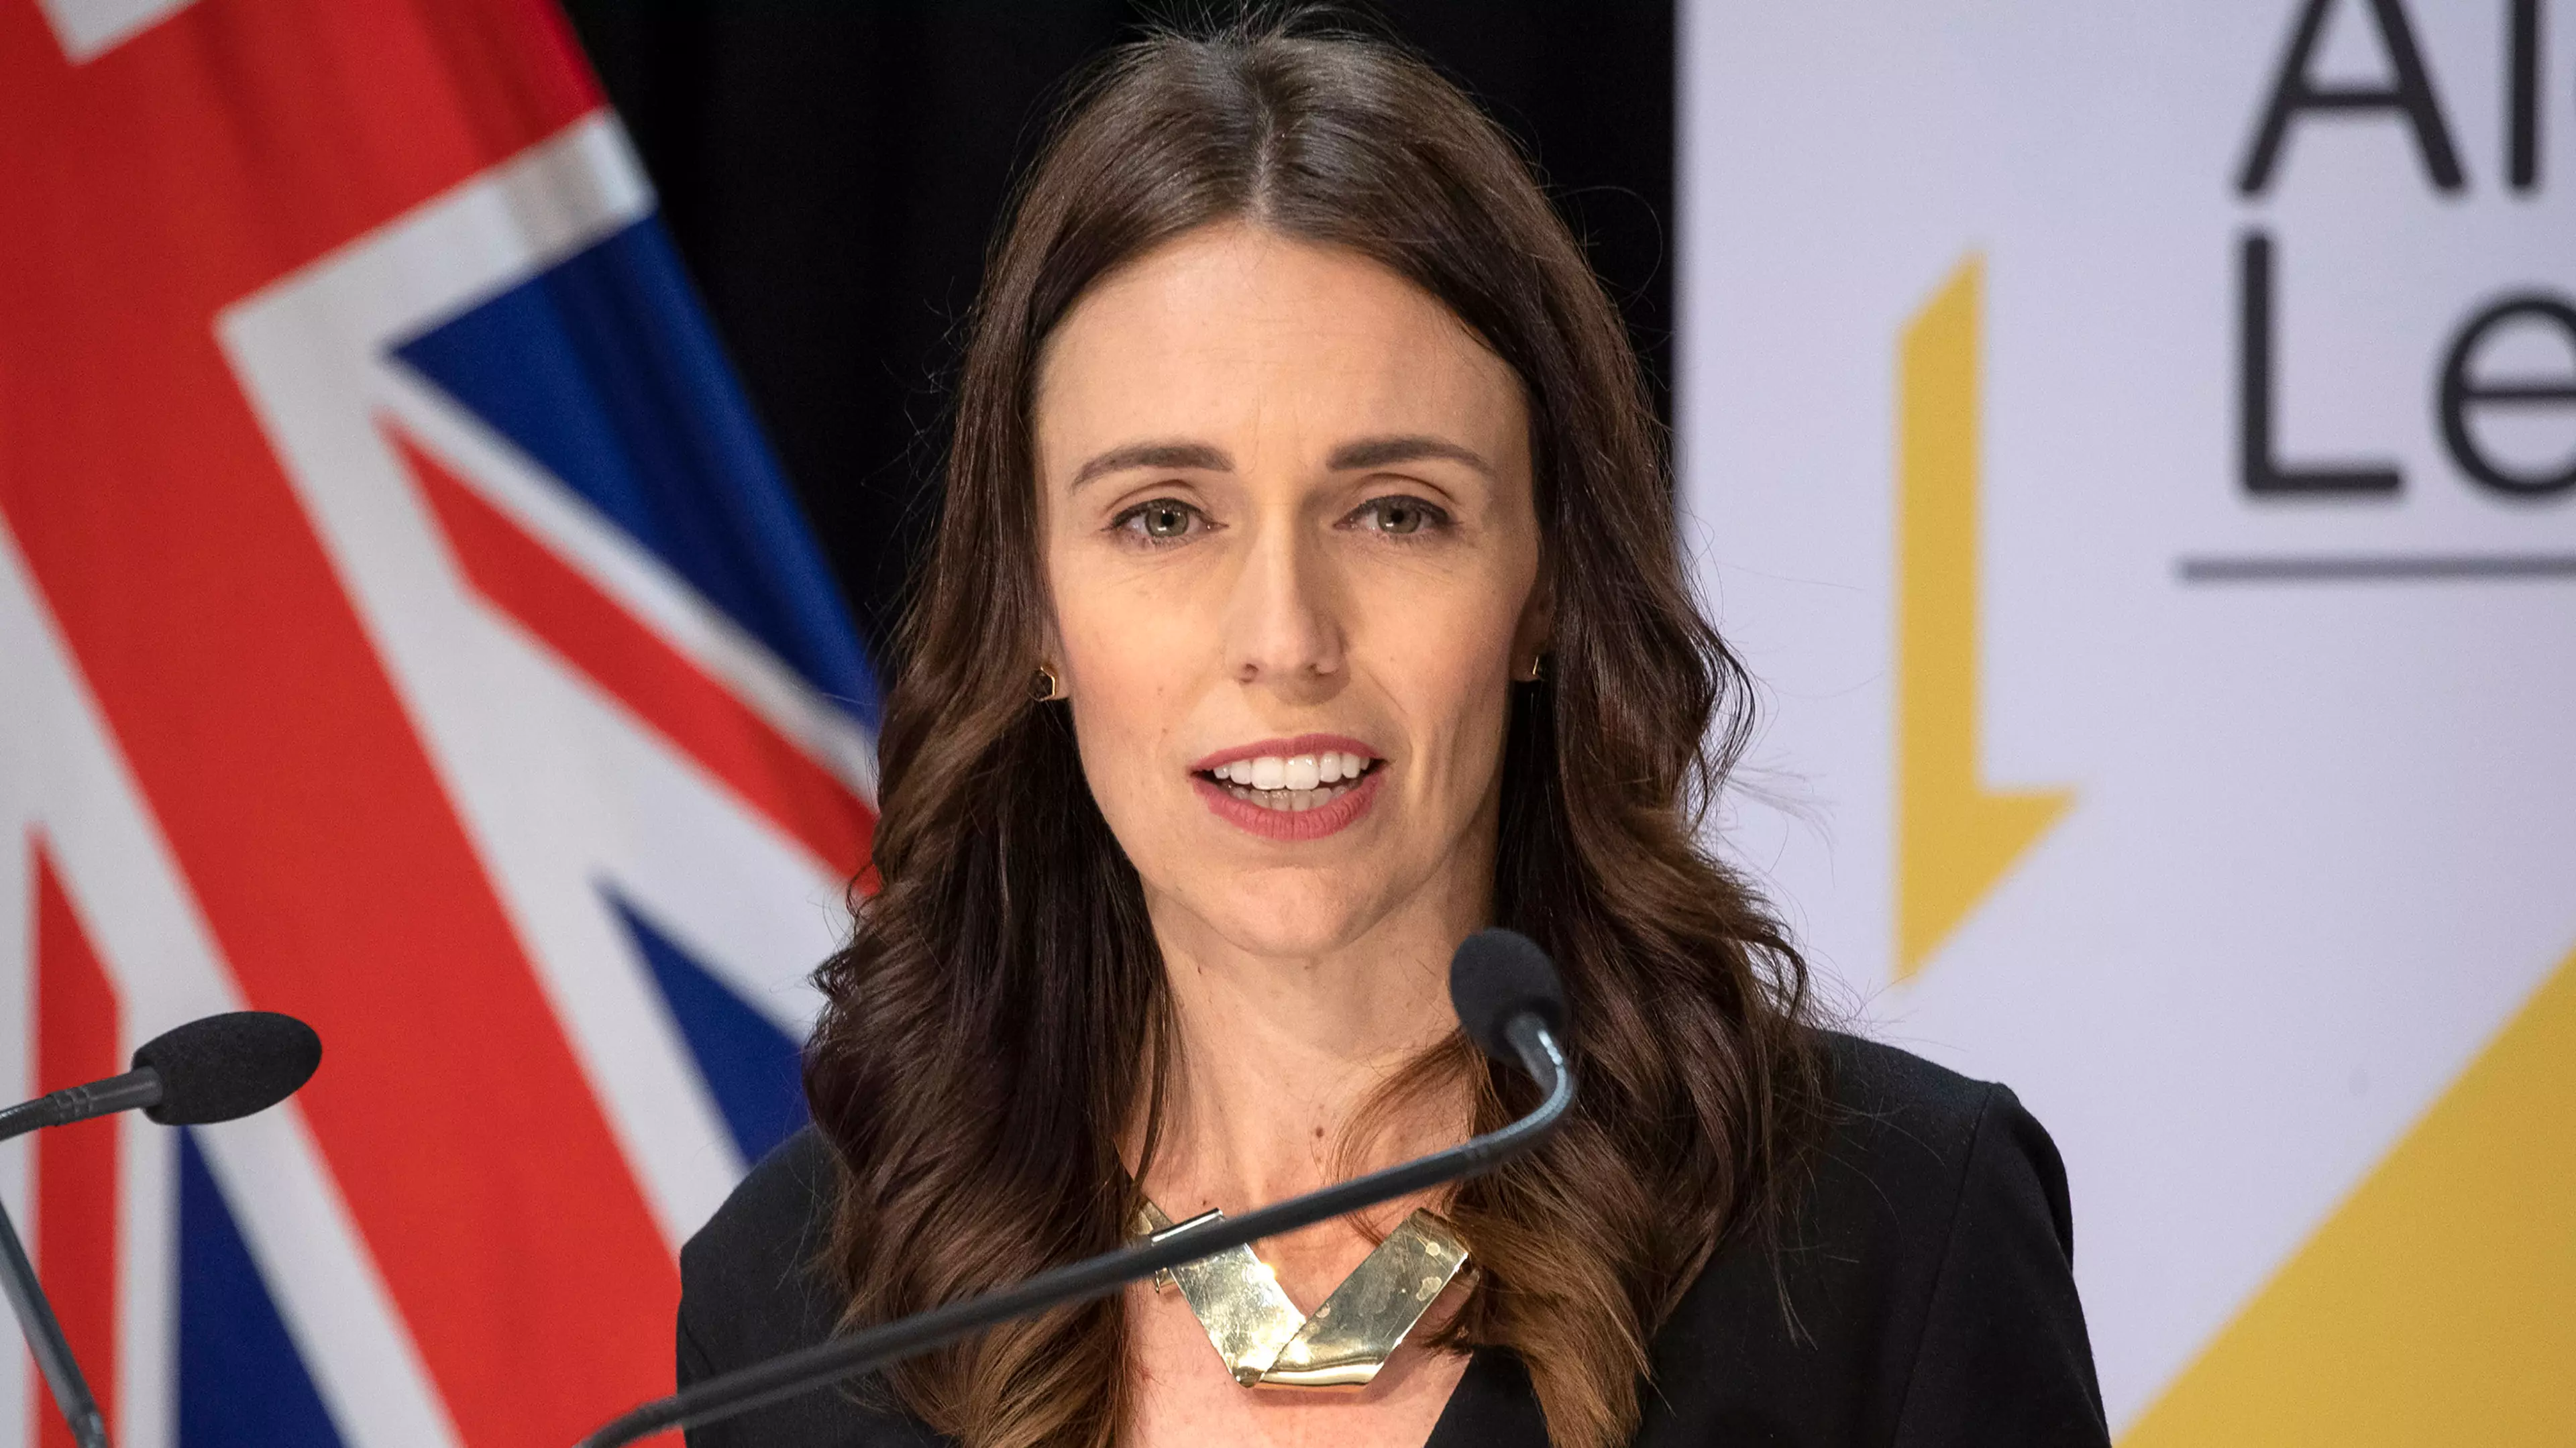 Jacinda Ardern Suggests New Zealand Could Have A 4 Day Work Week